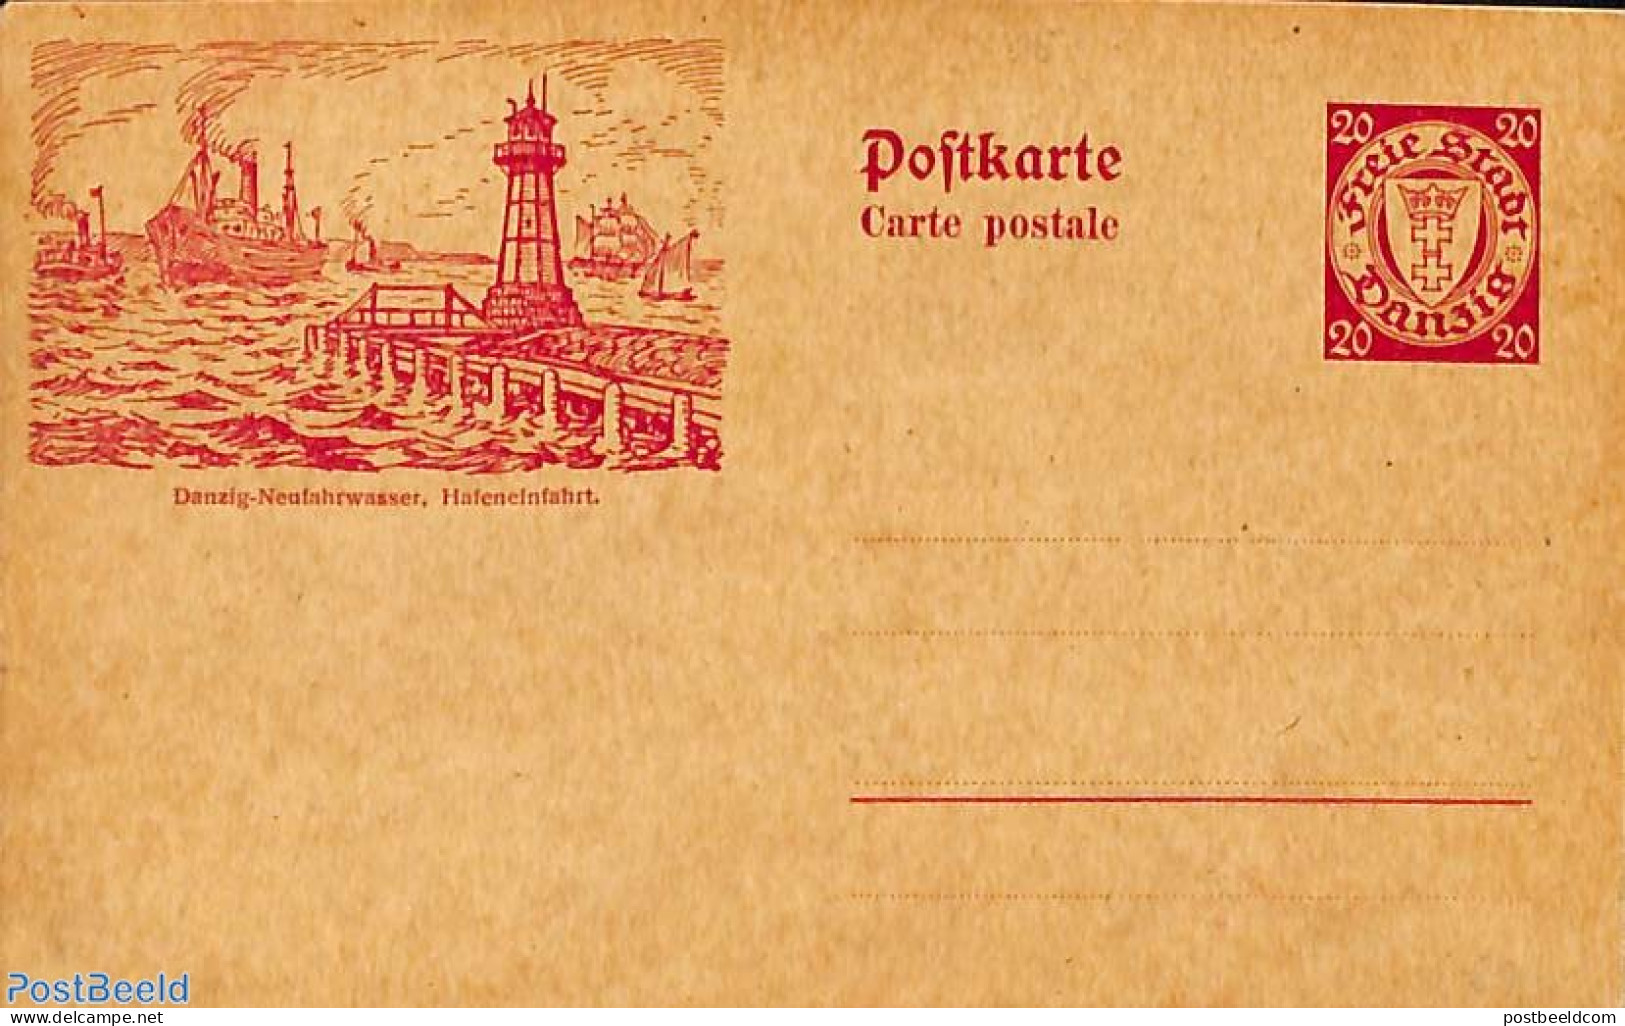 Germany, Danzig 1925 Illustrated Postcard 20pf, Unused Postal Stationary, Transport - Various - Ships And Boats - Ligh.. - Ships